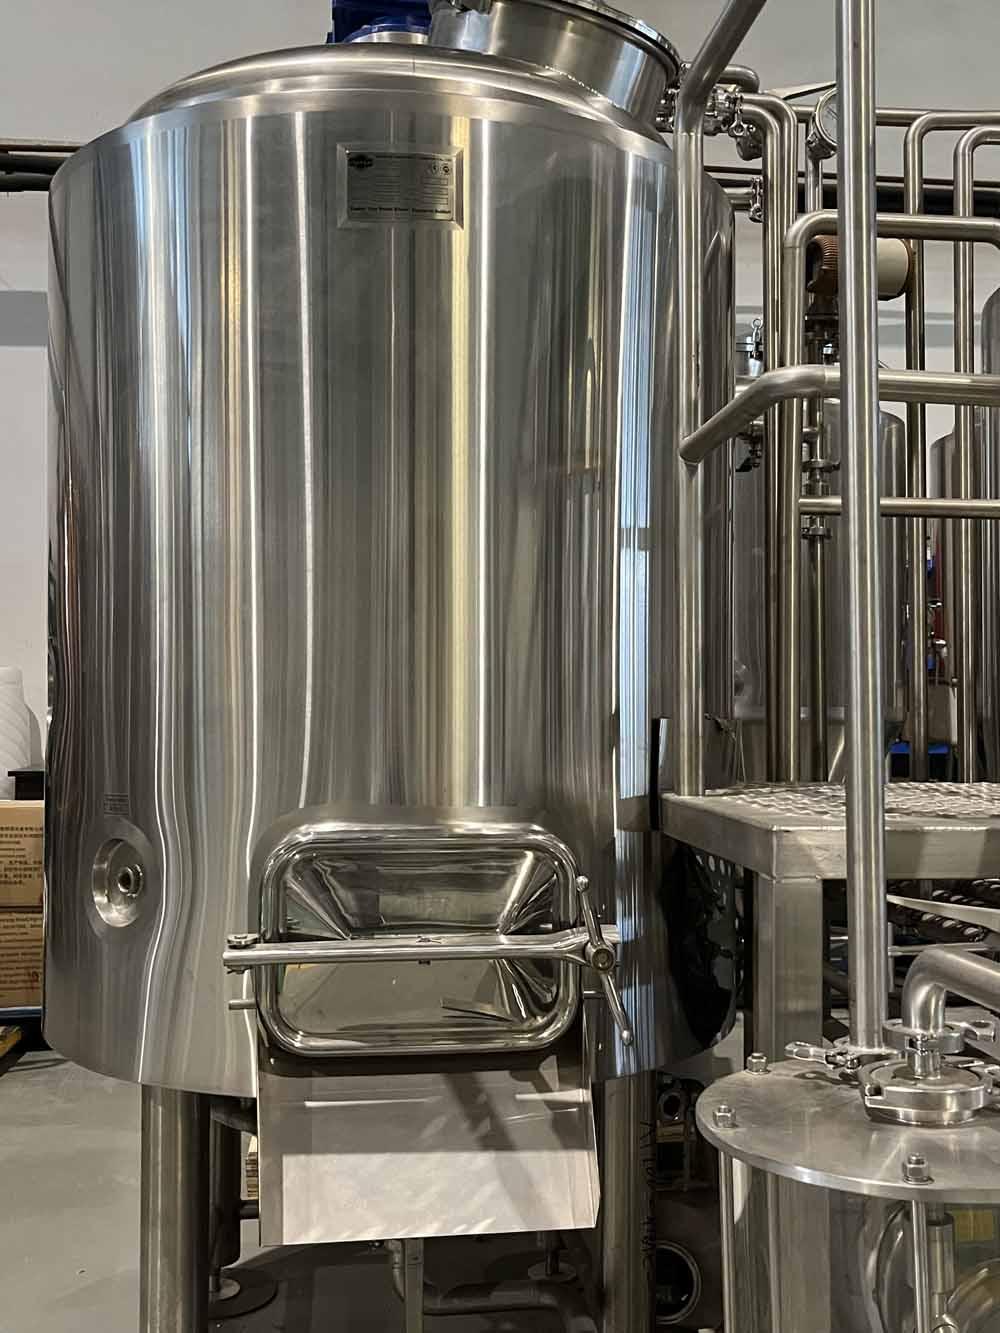 <b>What are the advancements of modern lauter tanks compared with traditional lauter tanks</b>